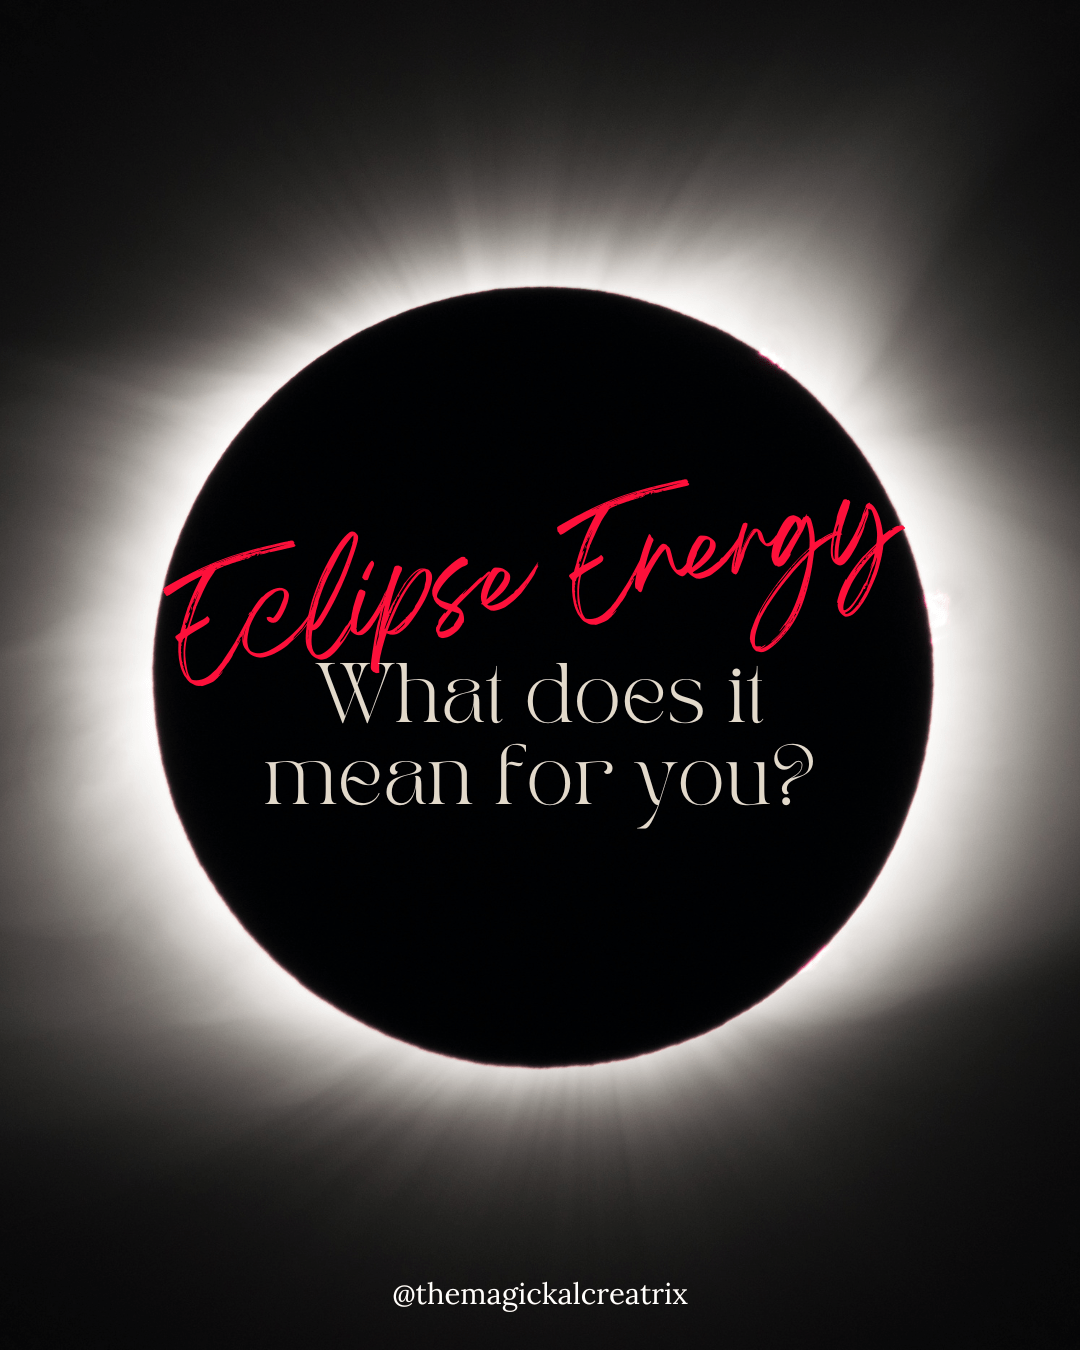 Eclipse Energy, What does it mean for you